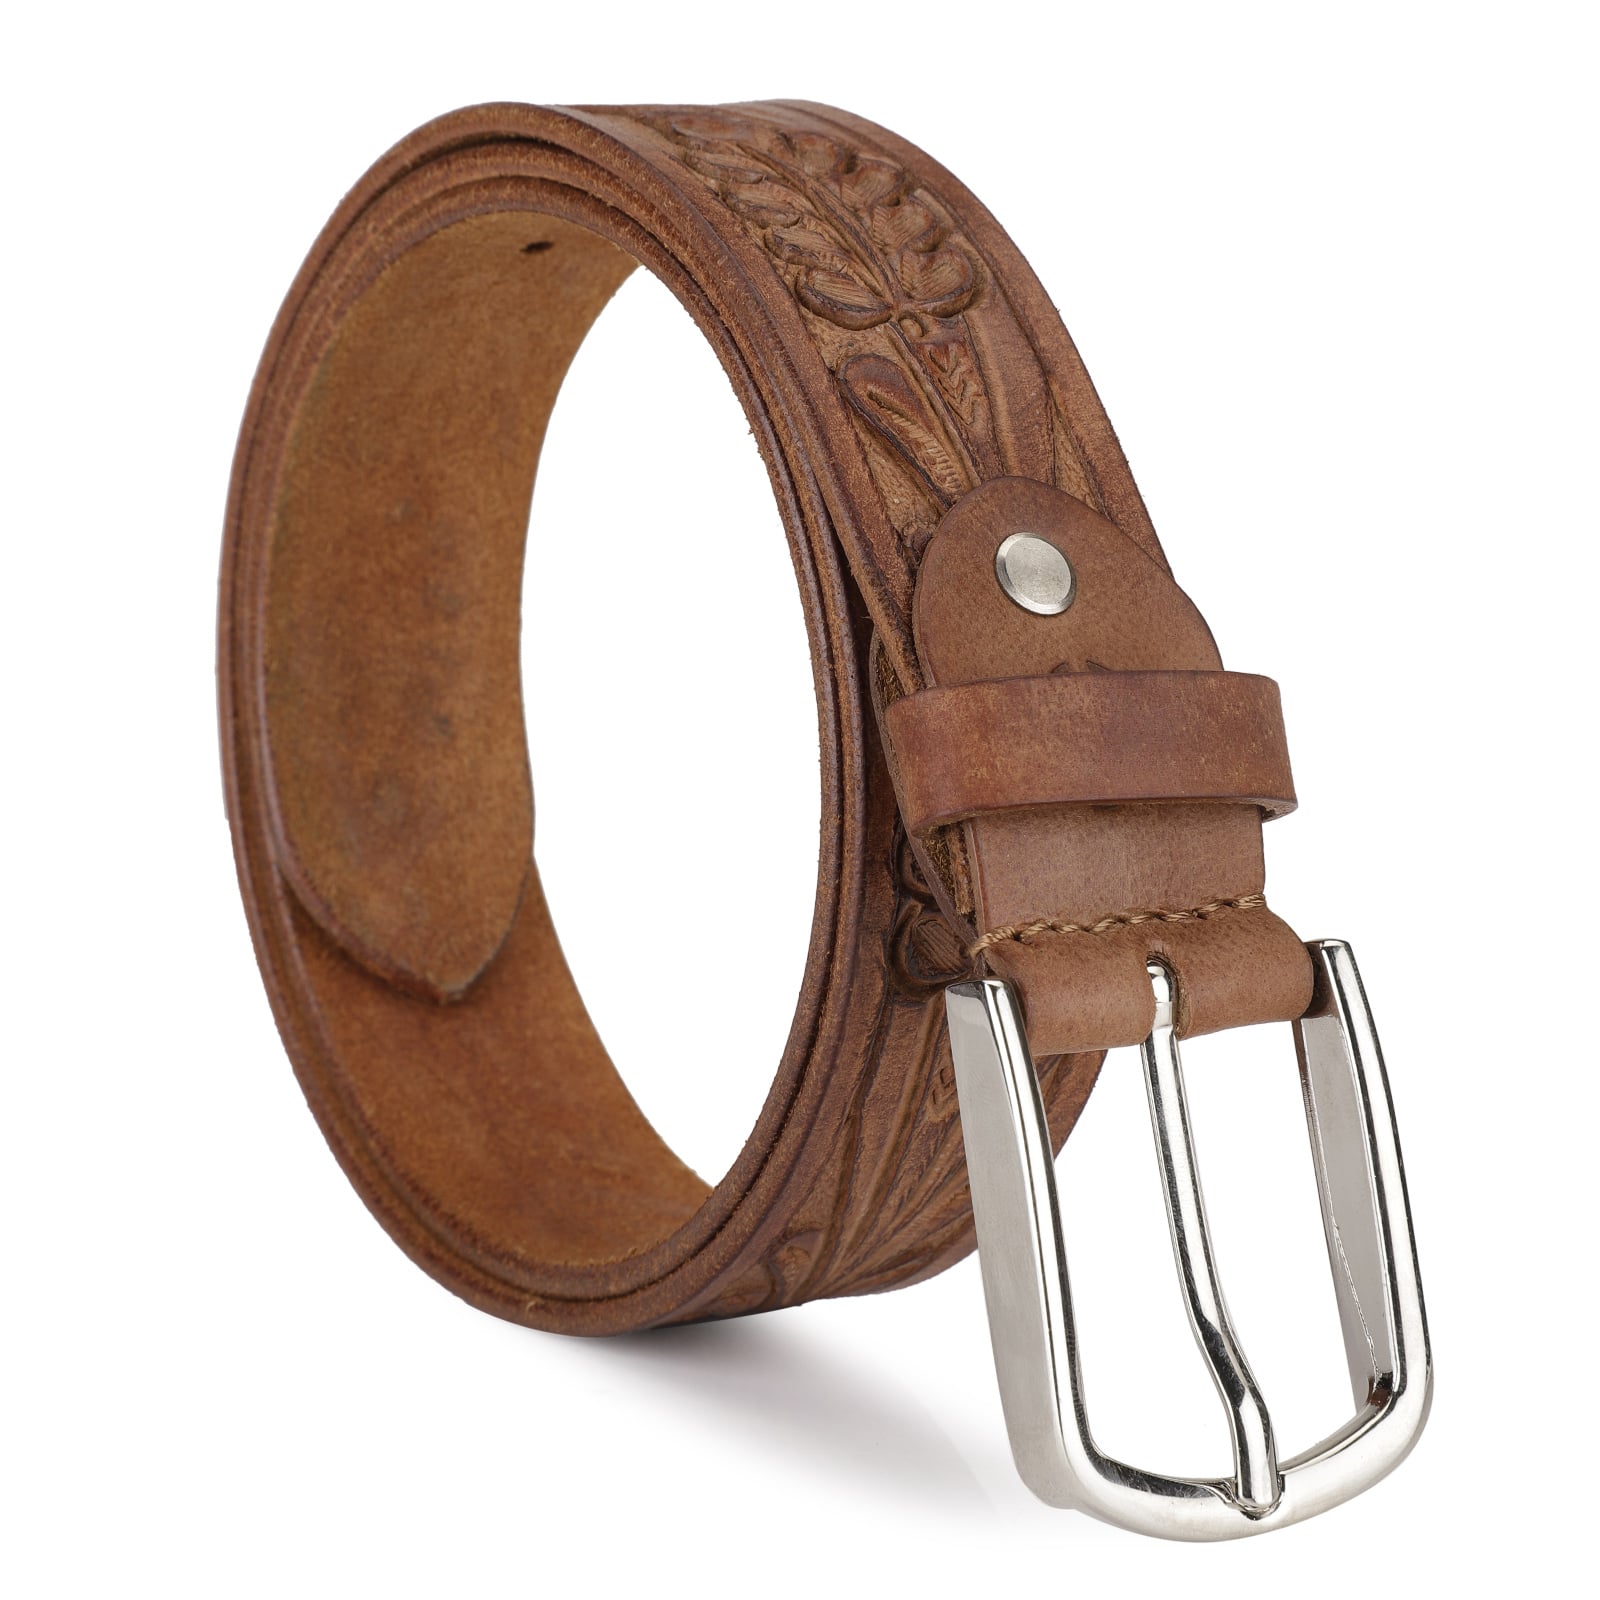 Hand Crafted Hand Tool Leather Belt in Tan